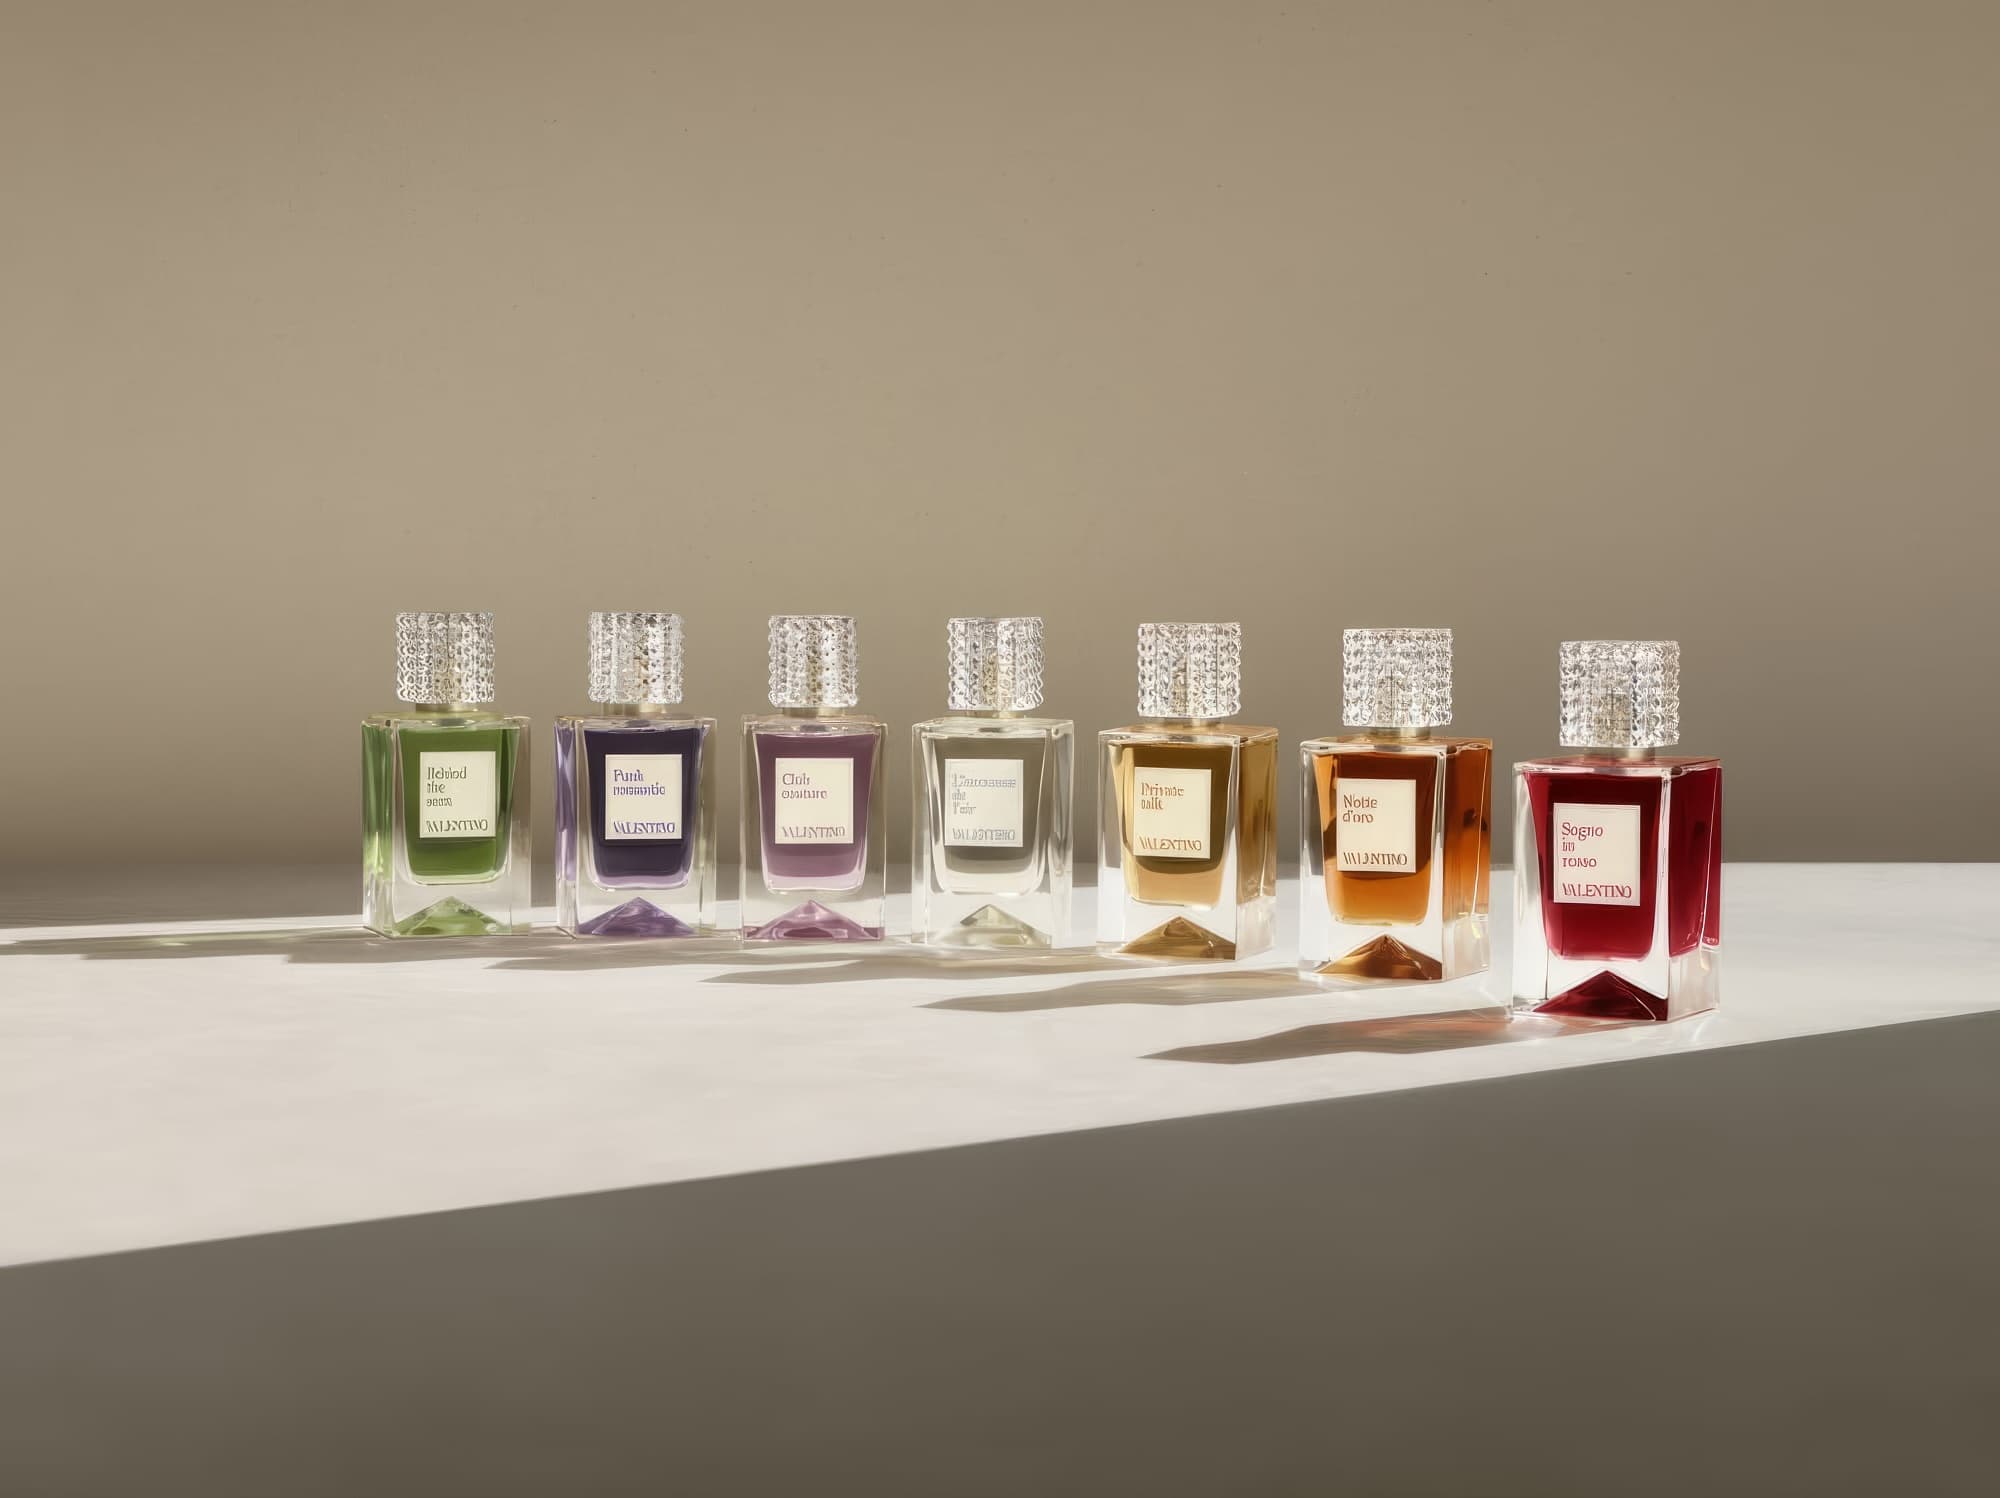 Valentino “Anatomy of Dreams” Fragrance Collection